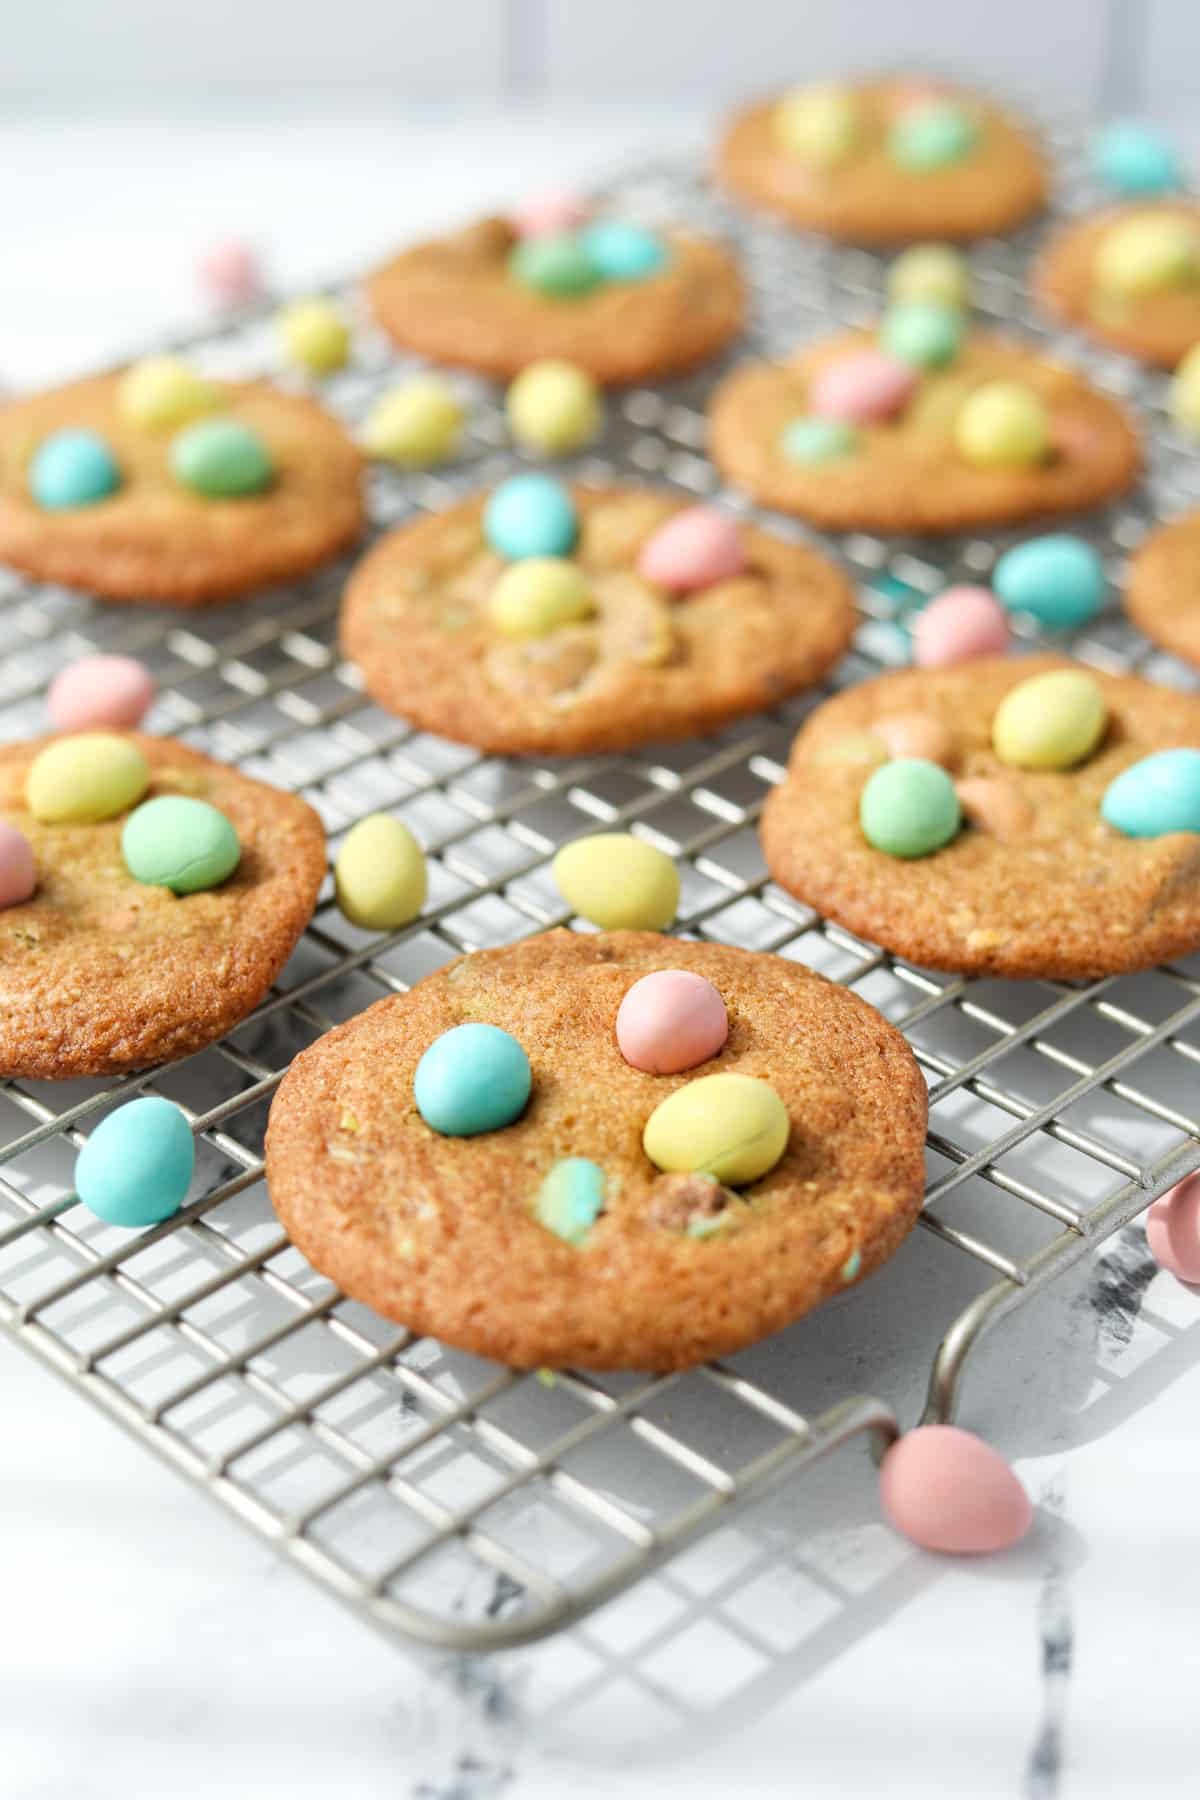 Mini egg cookies cooling on a wire rack.